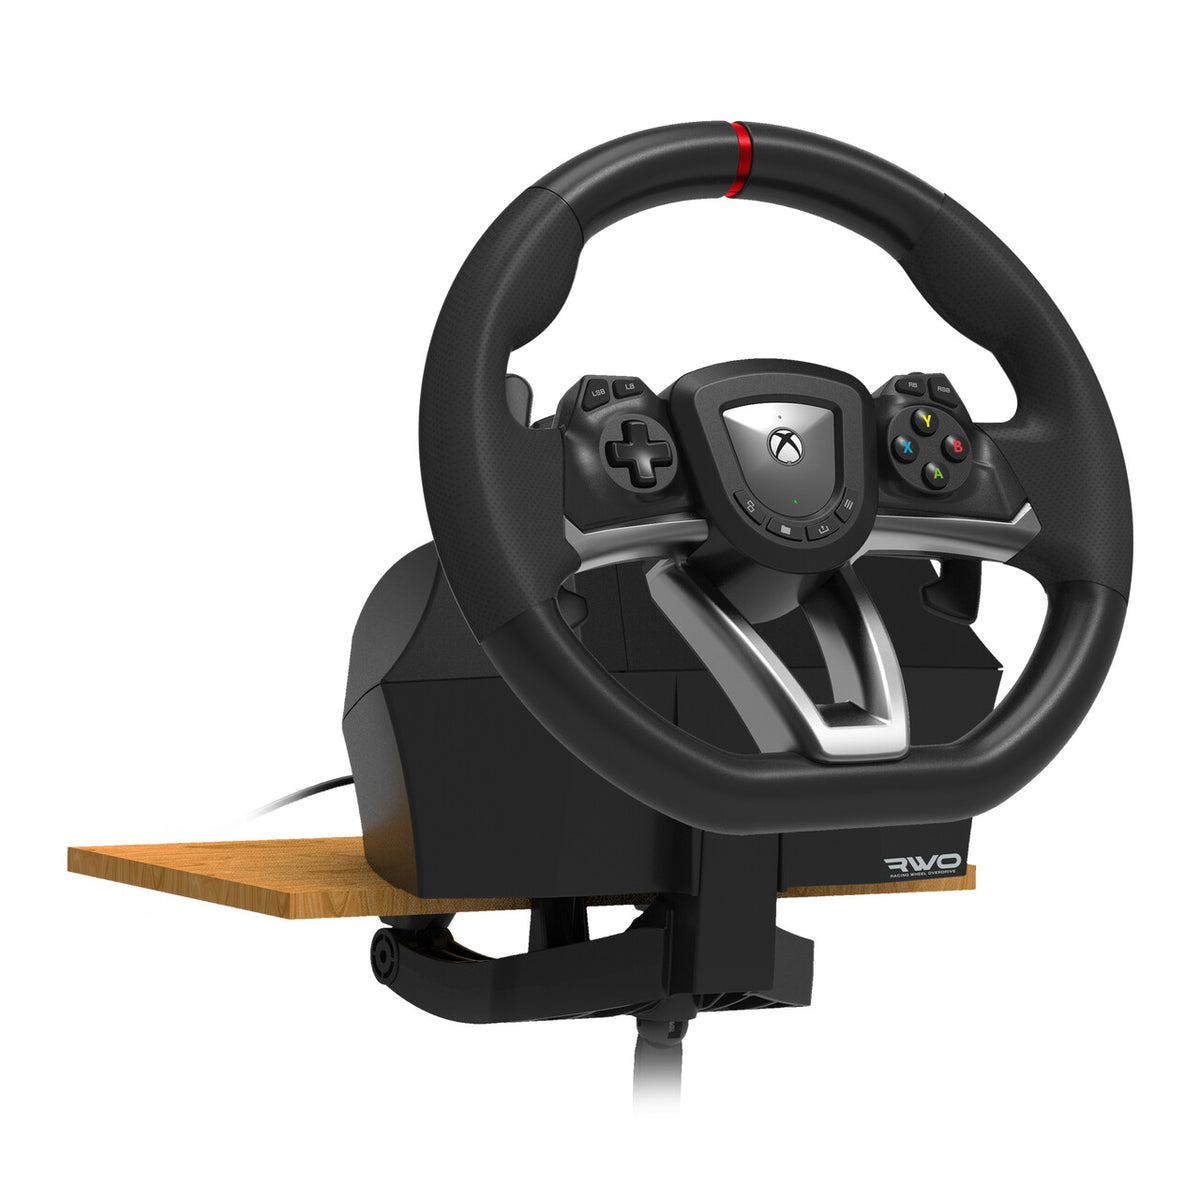 Hori Racing Wheel Overdrive - Steering Wheel Controller for PC / Xbox Series S|X